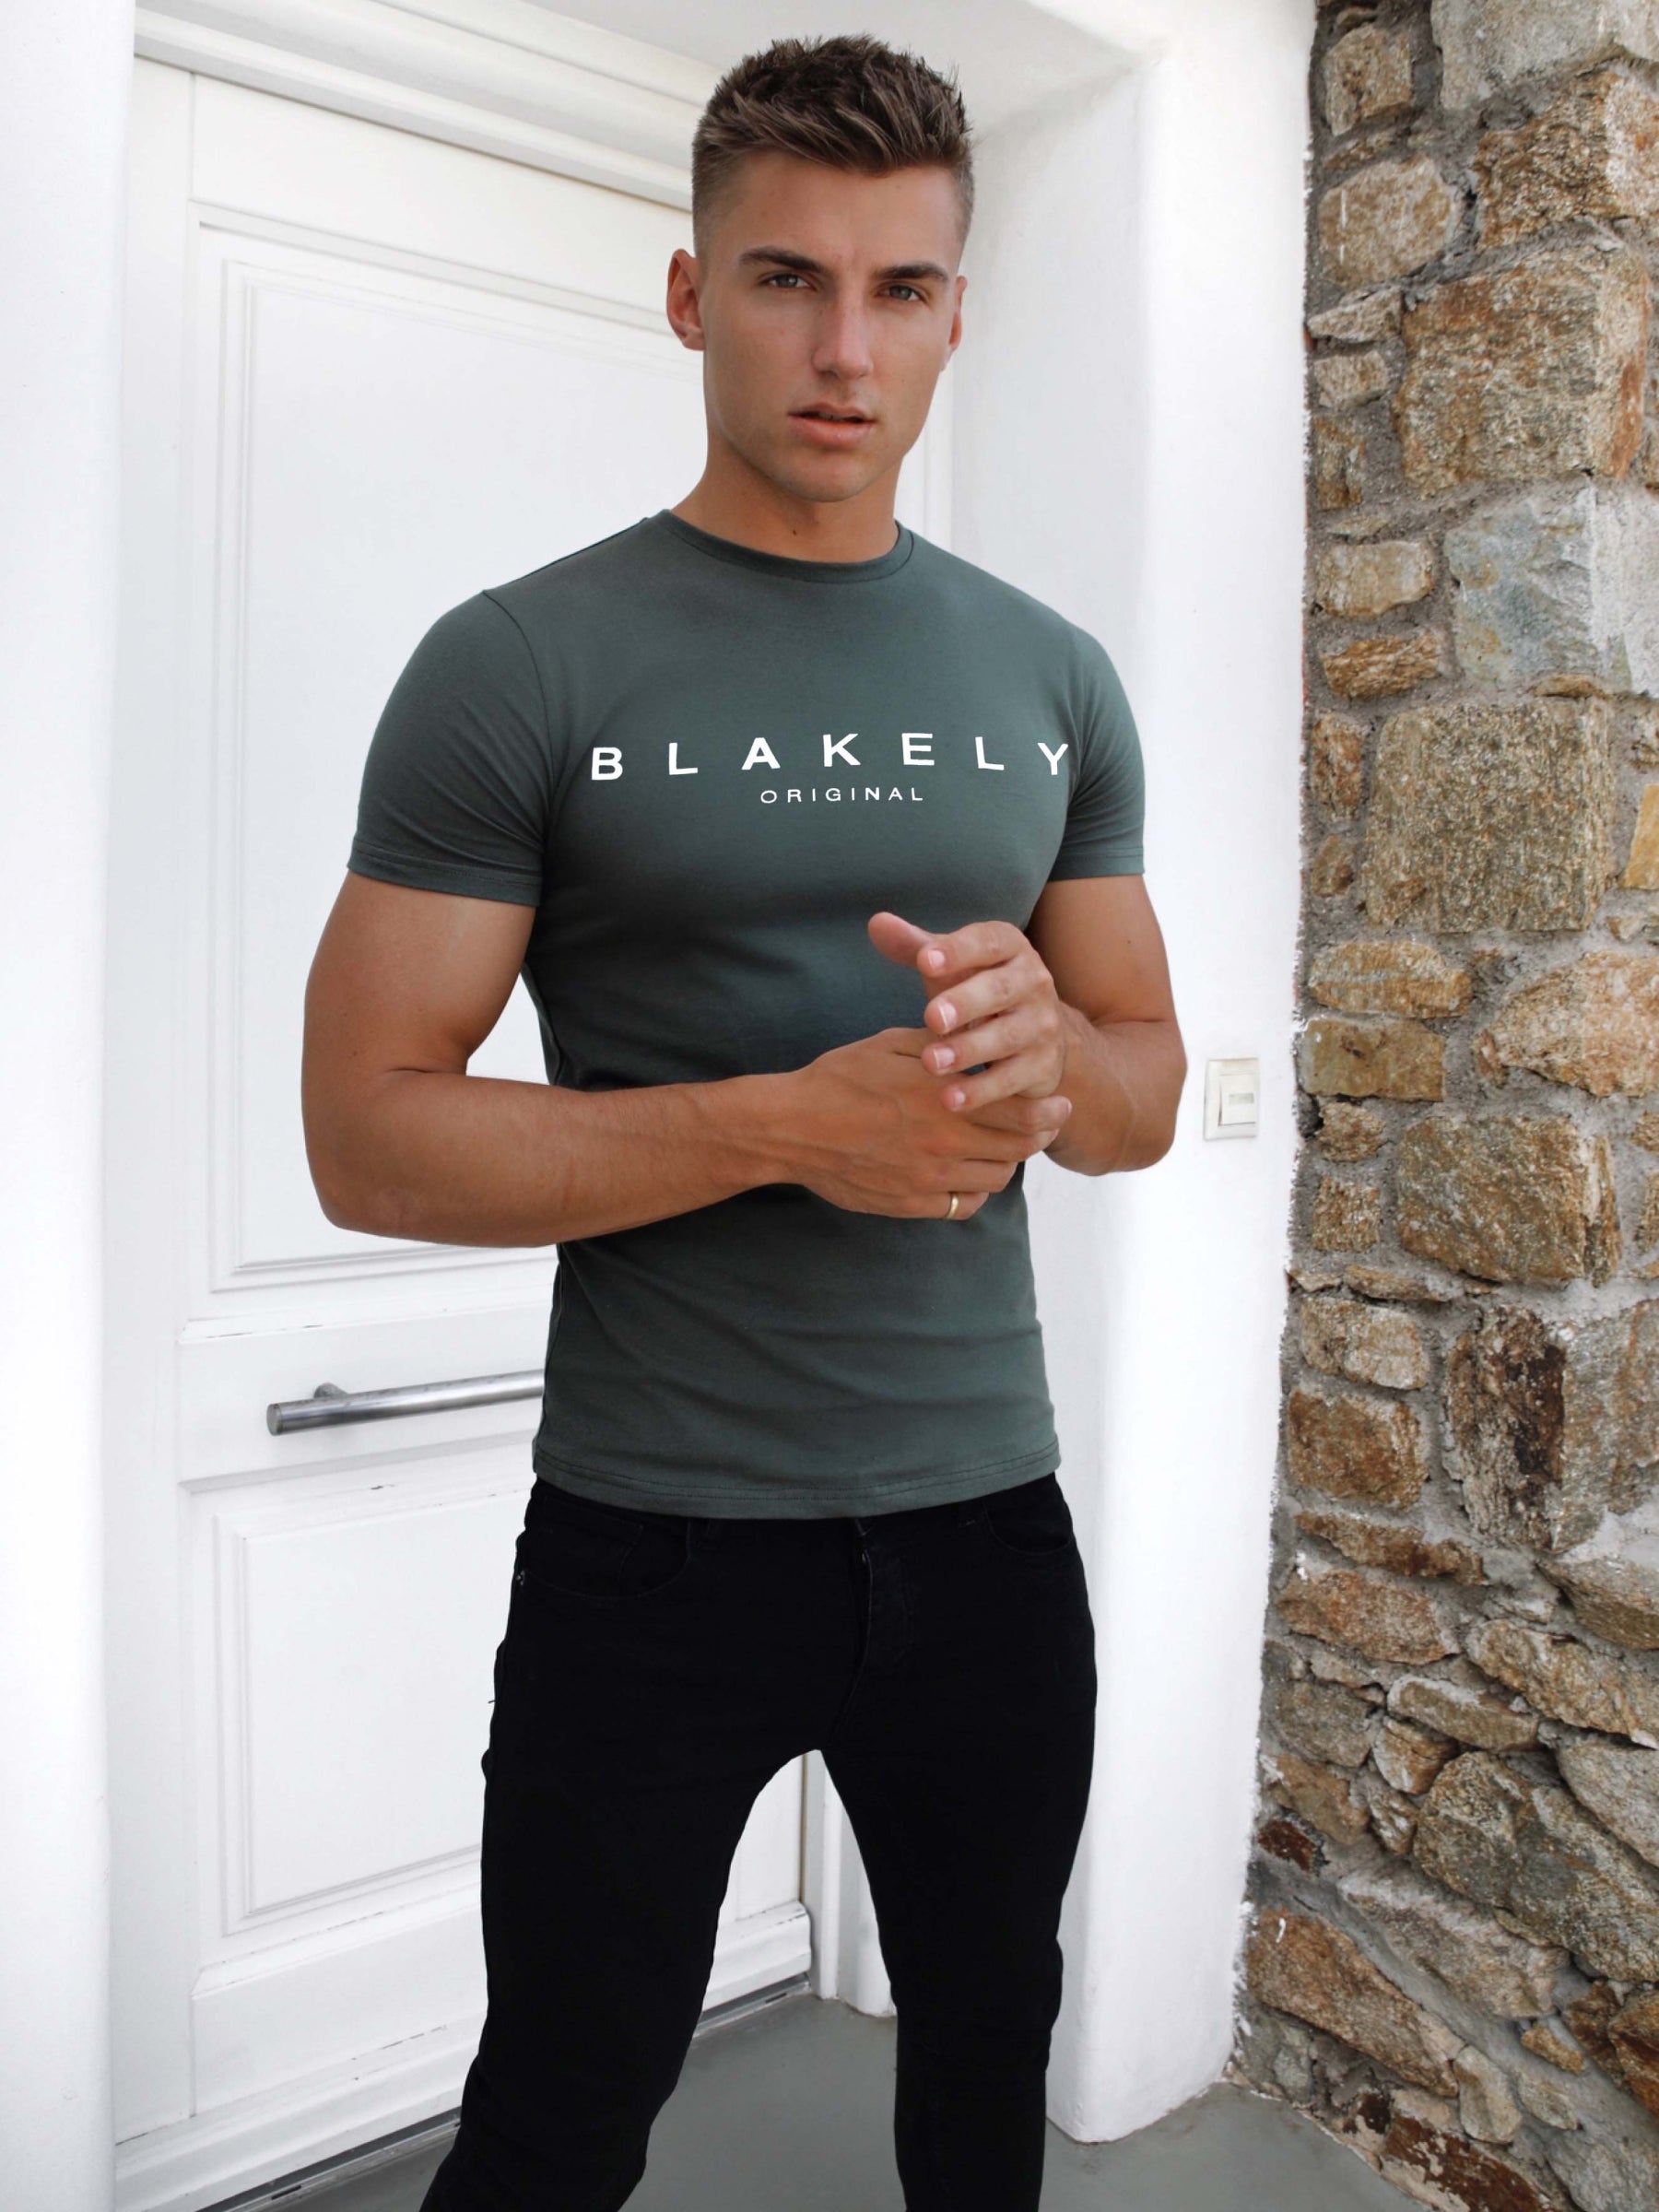 Blakely Clothing Tahiti Mens Green T-Shirt | Free delivery on orders ...